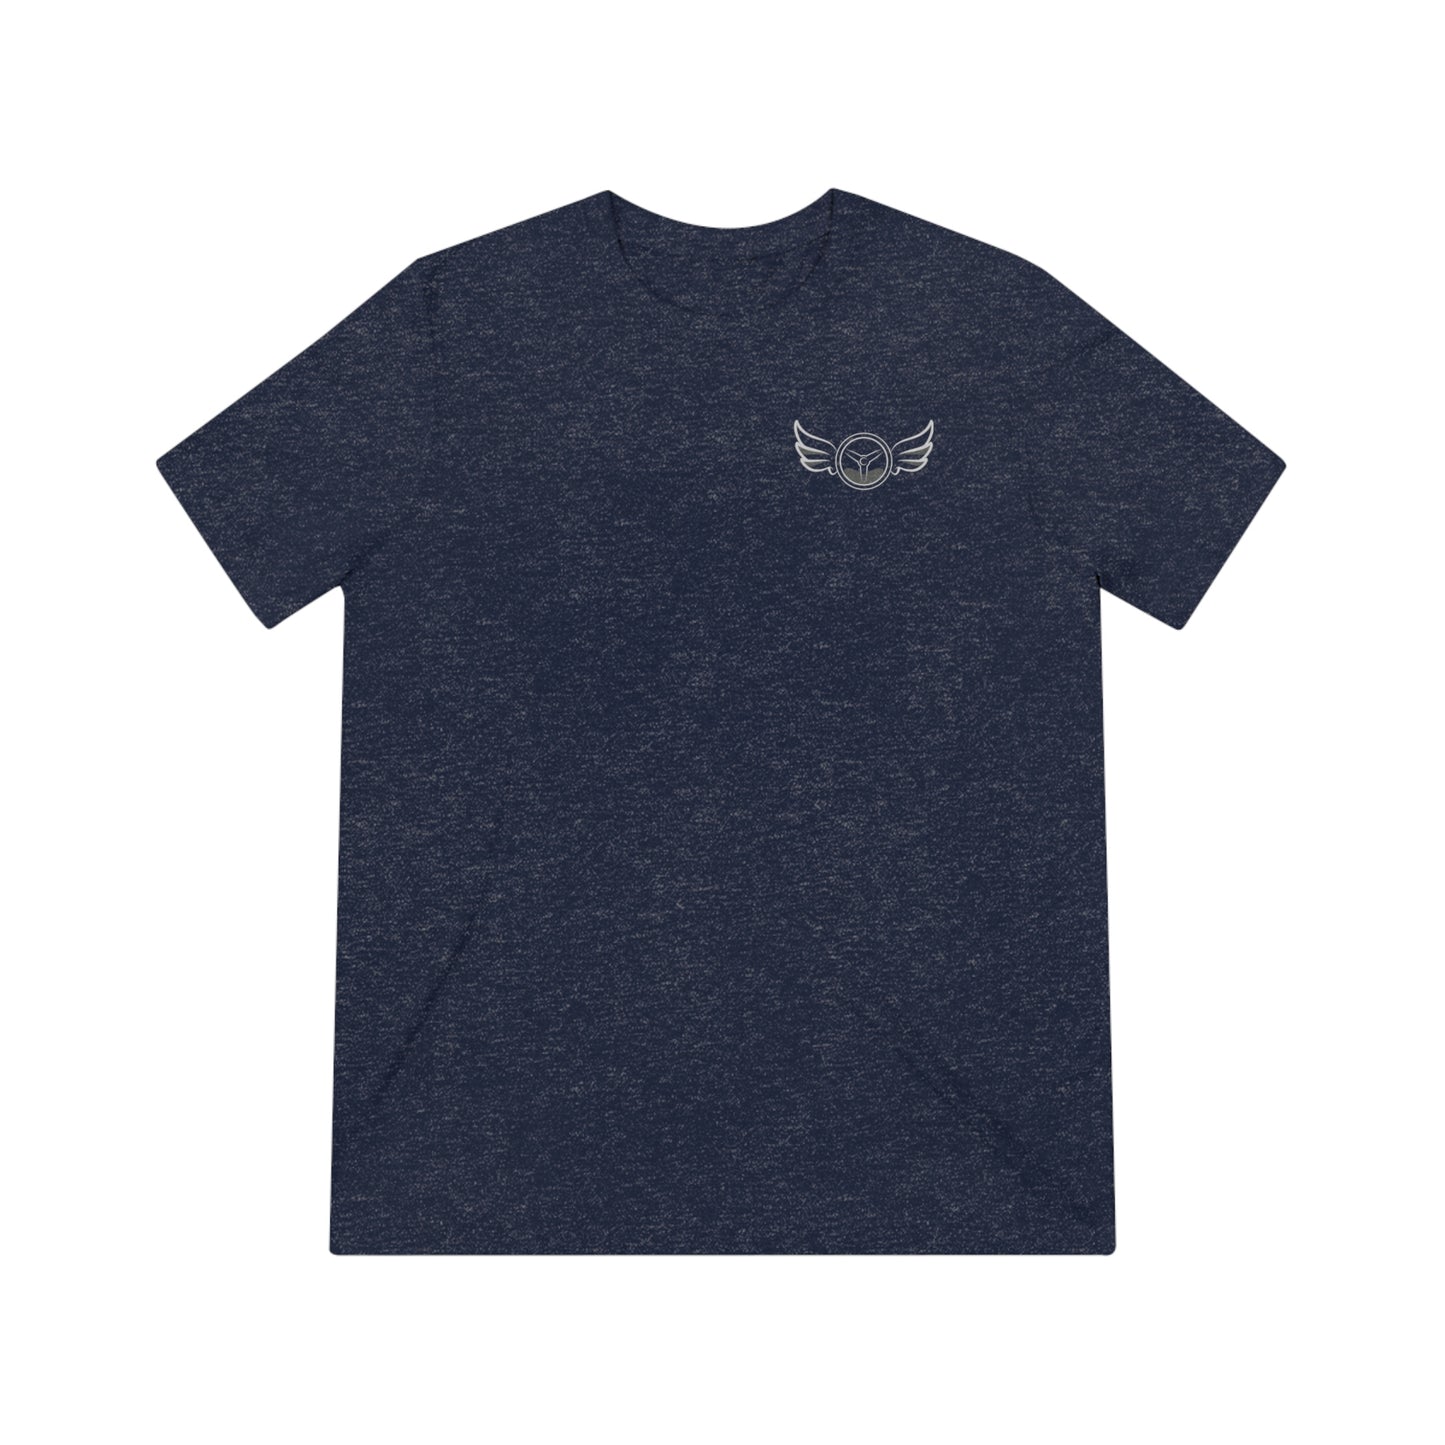 TEAM THICK 'WINGS' Unisex Triblend Tee